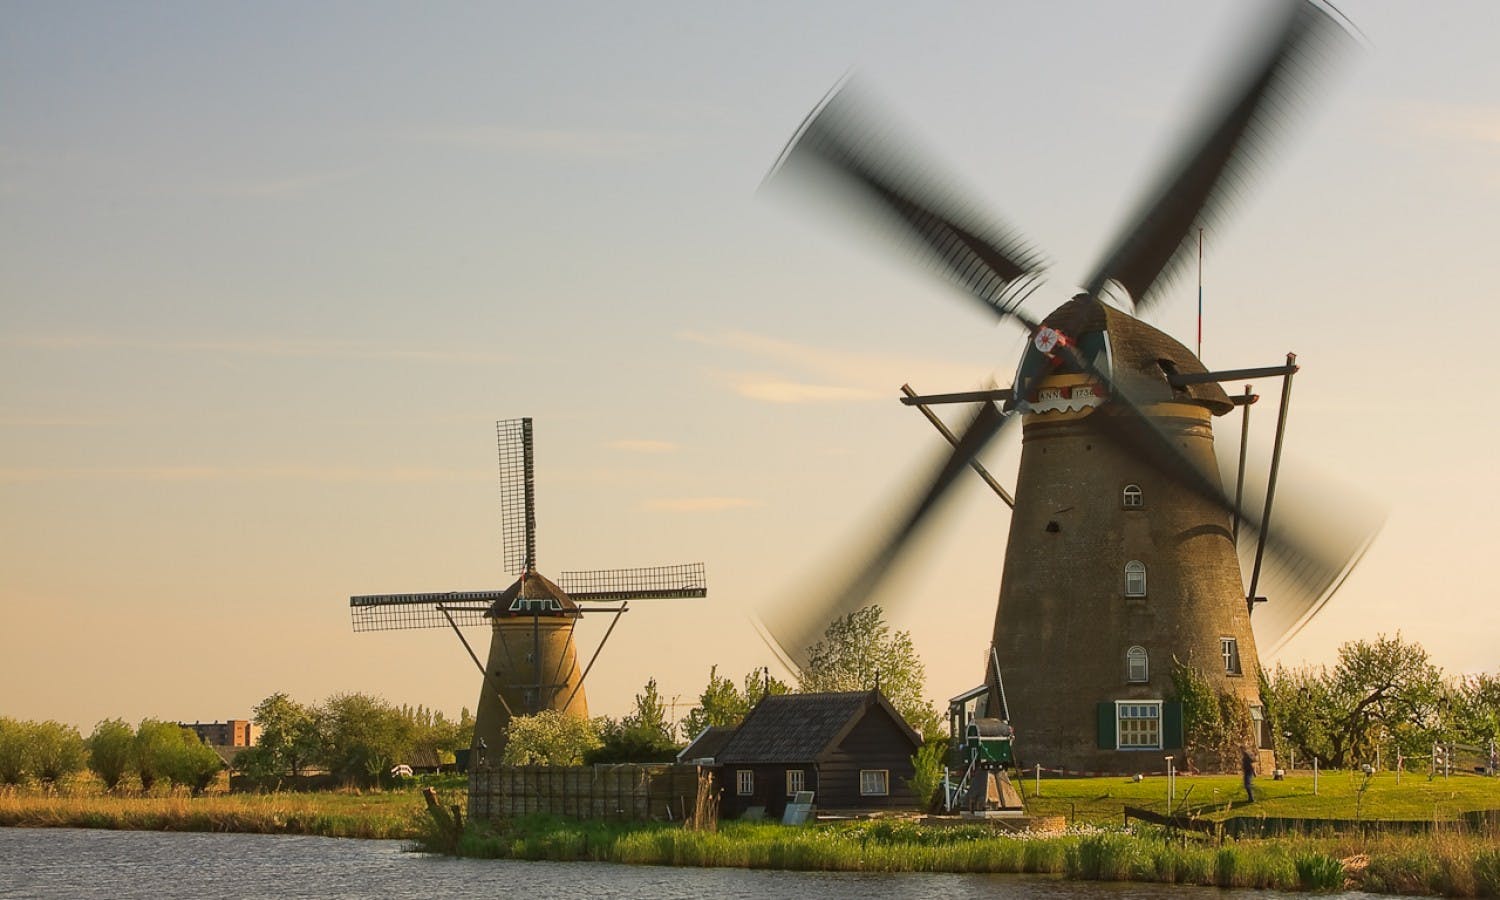 Day trip to Kinderdijk windmills and The Hague Musement